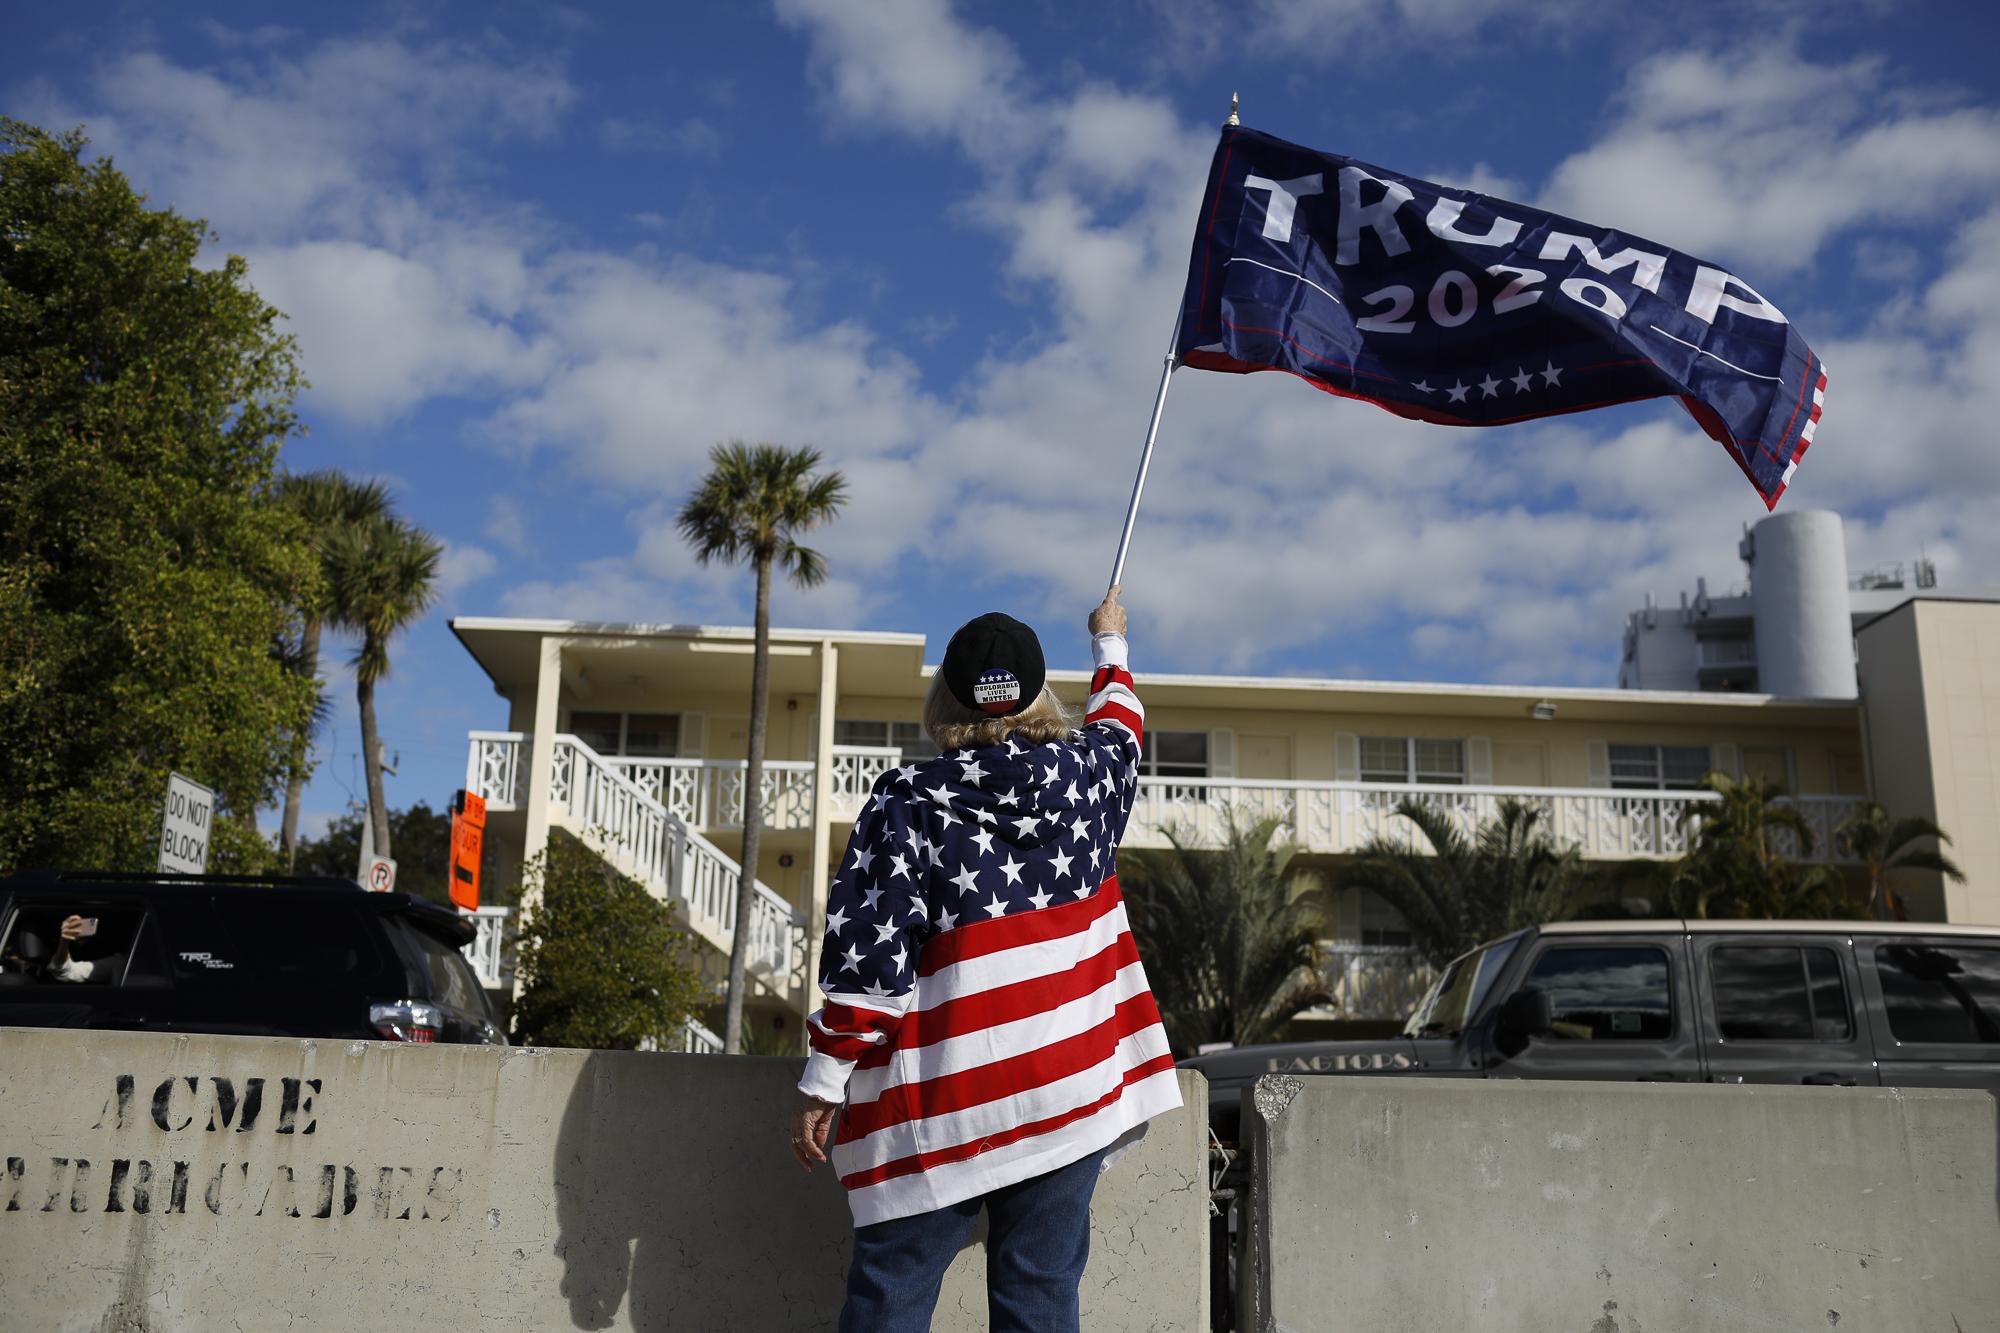 Supporters of President Donald Trump stand near the road as he arrives in West Palm Beach, Florida, U.S., January 20, 2021. REUTERS/Marco Bello